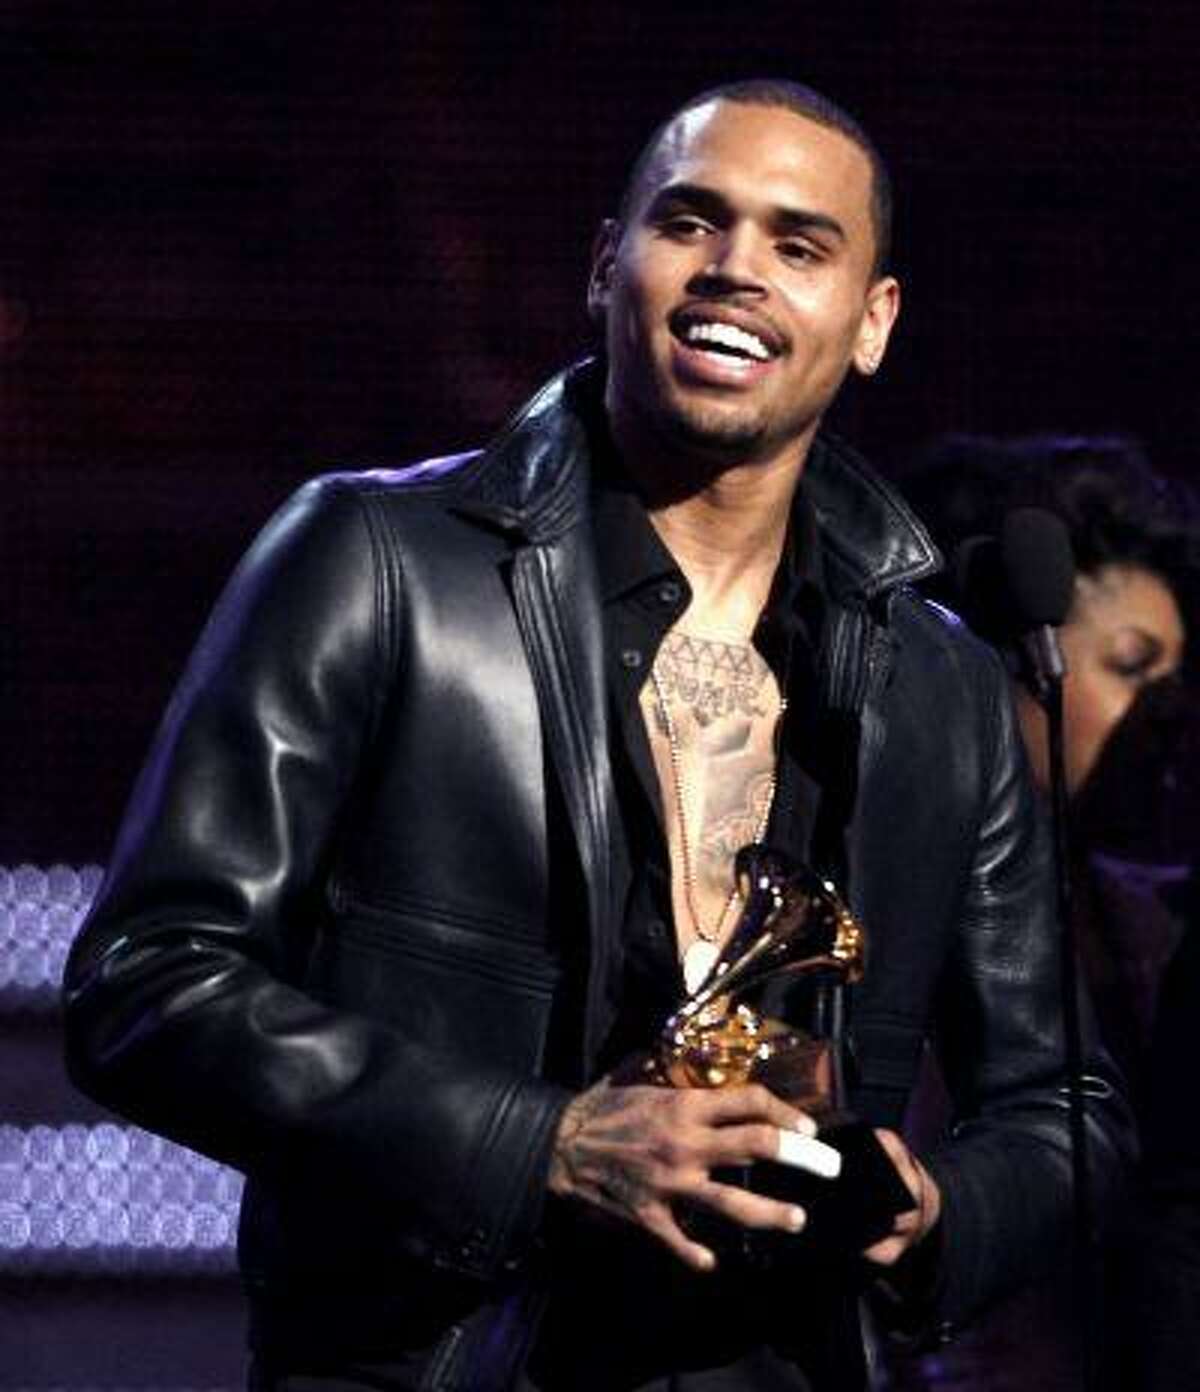 In this Feb. 12, 2012 file photo, Chris Brown accepts the award for best R&B album for "F.A.M.E." during the 54th annual Grammy Awards in Los Angeles.